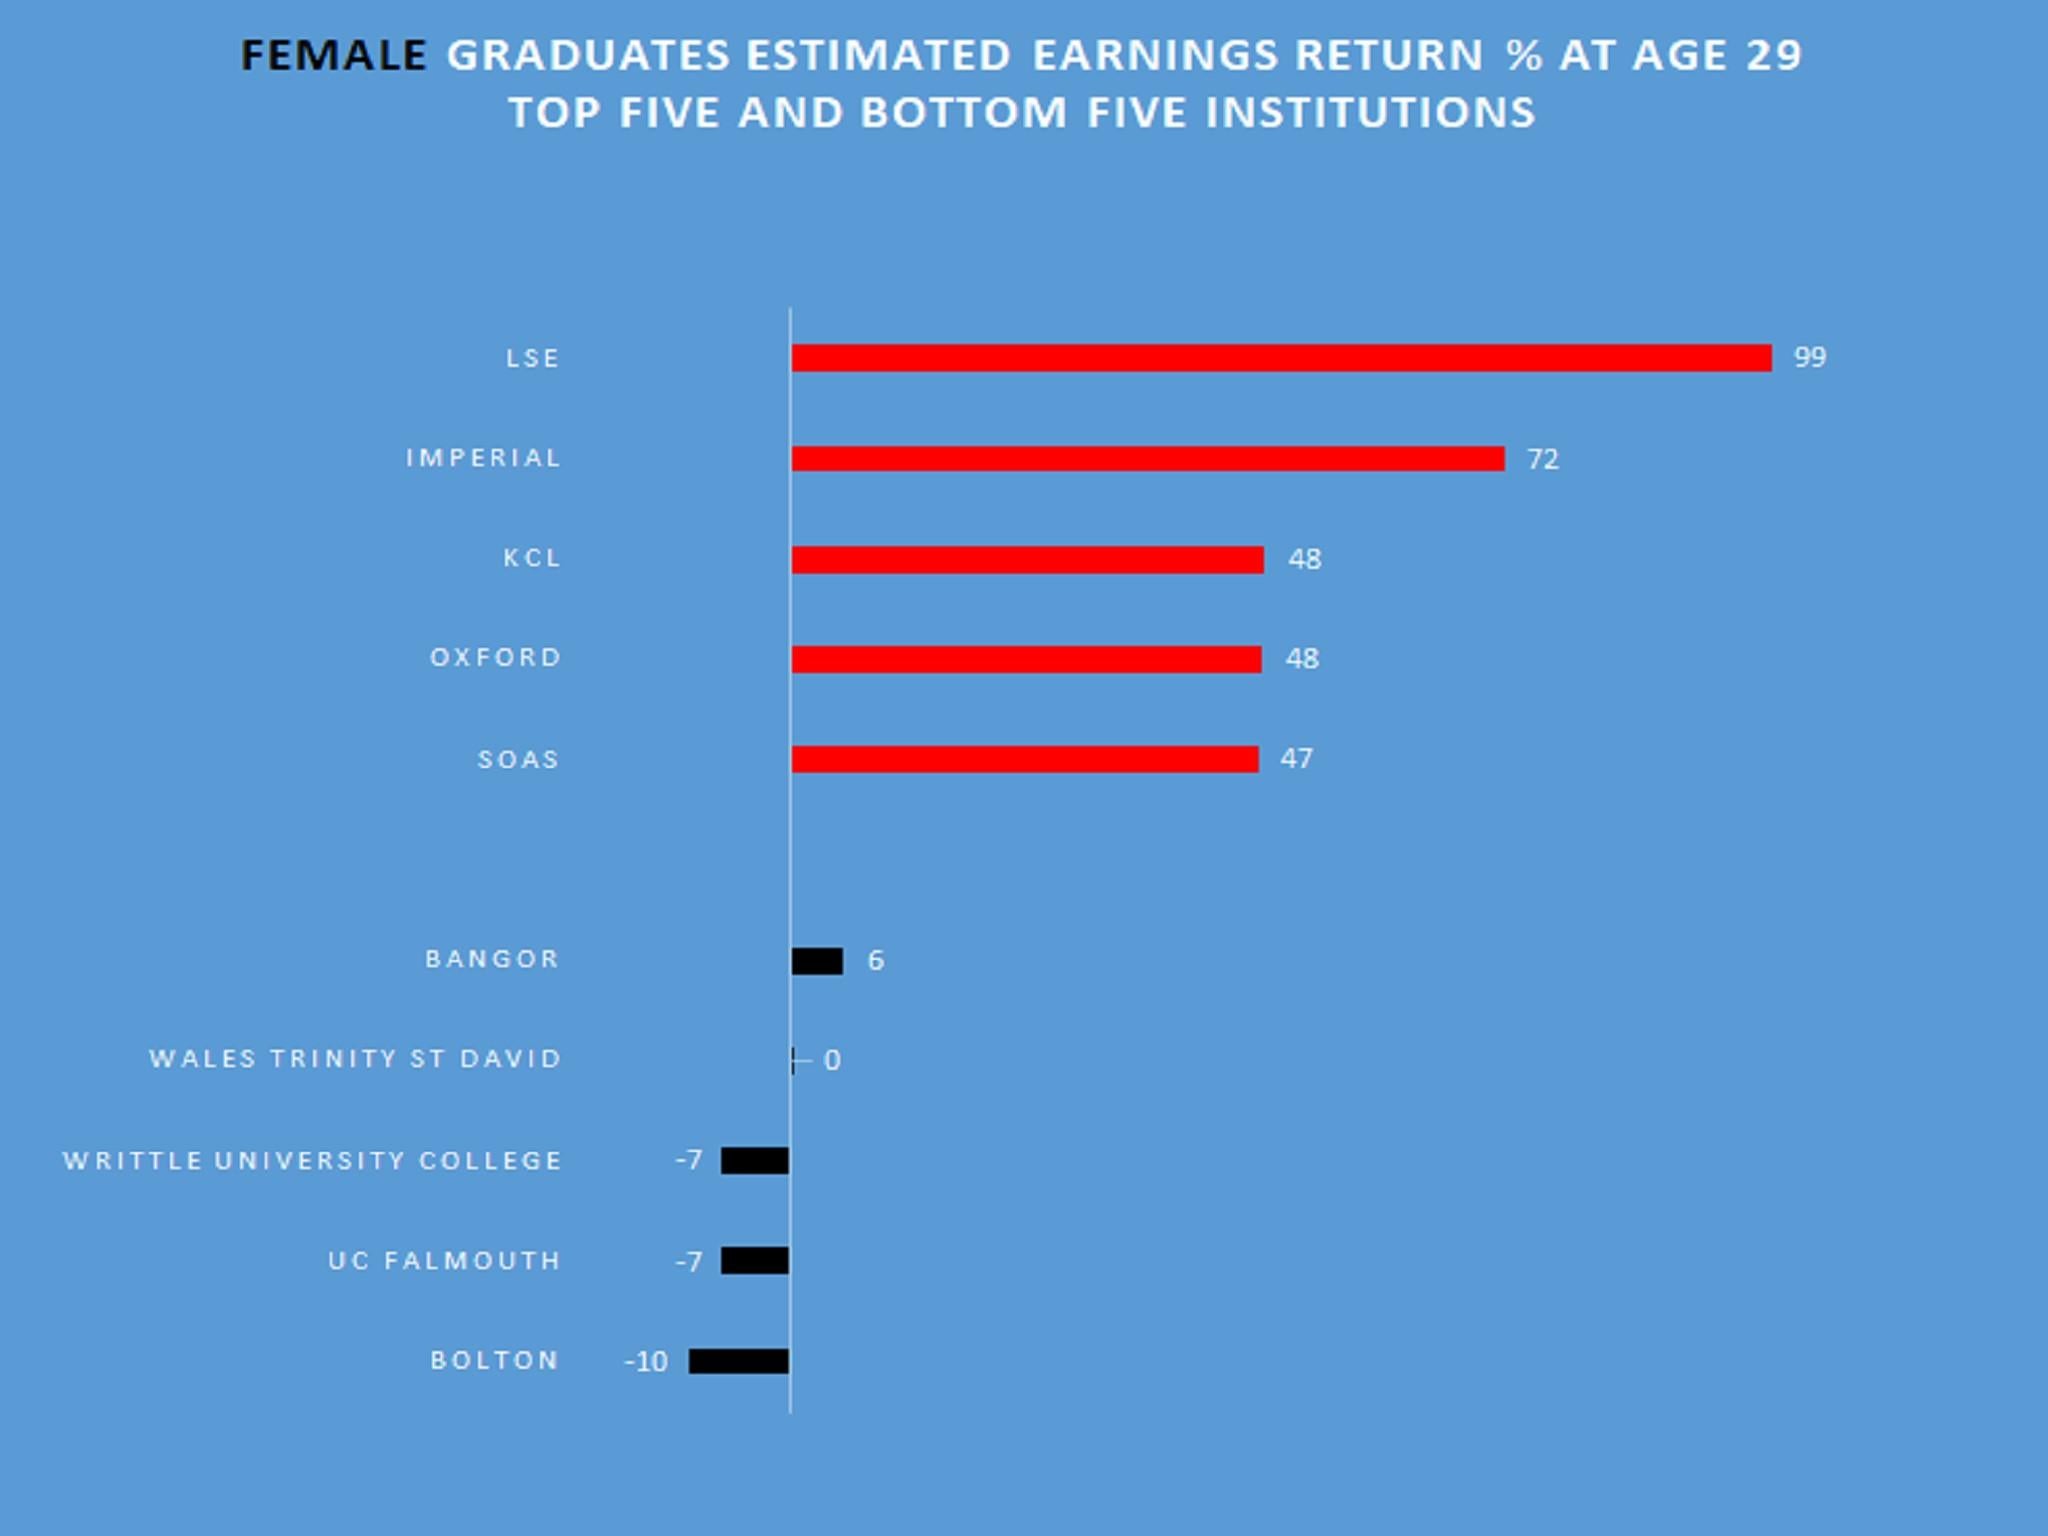 LSE is at the top for female graduates, while Bolton is at the bottom for earnings return